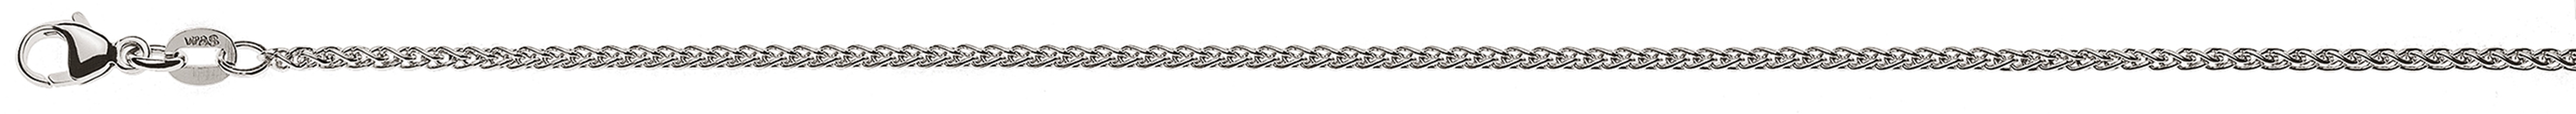 AURONOS Style Necklace white gold 9K cable chain 60cm 1.65mm